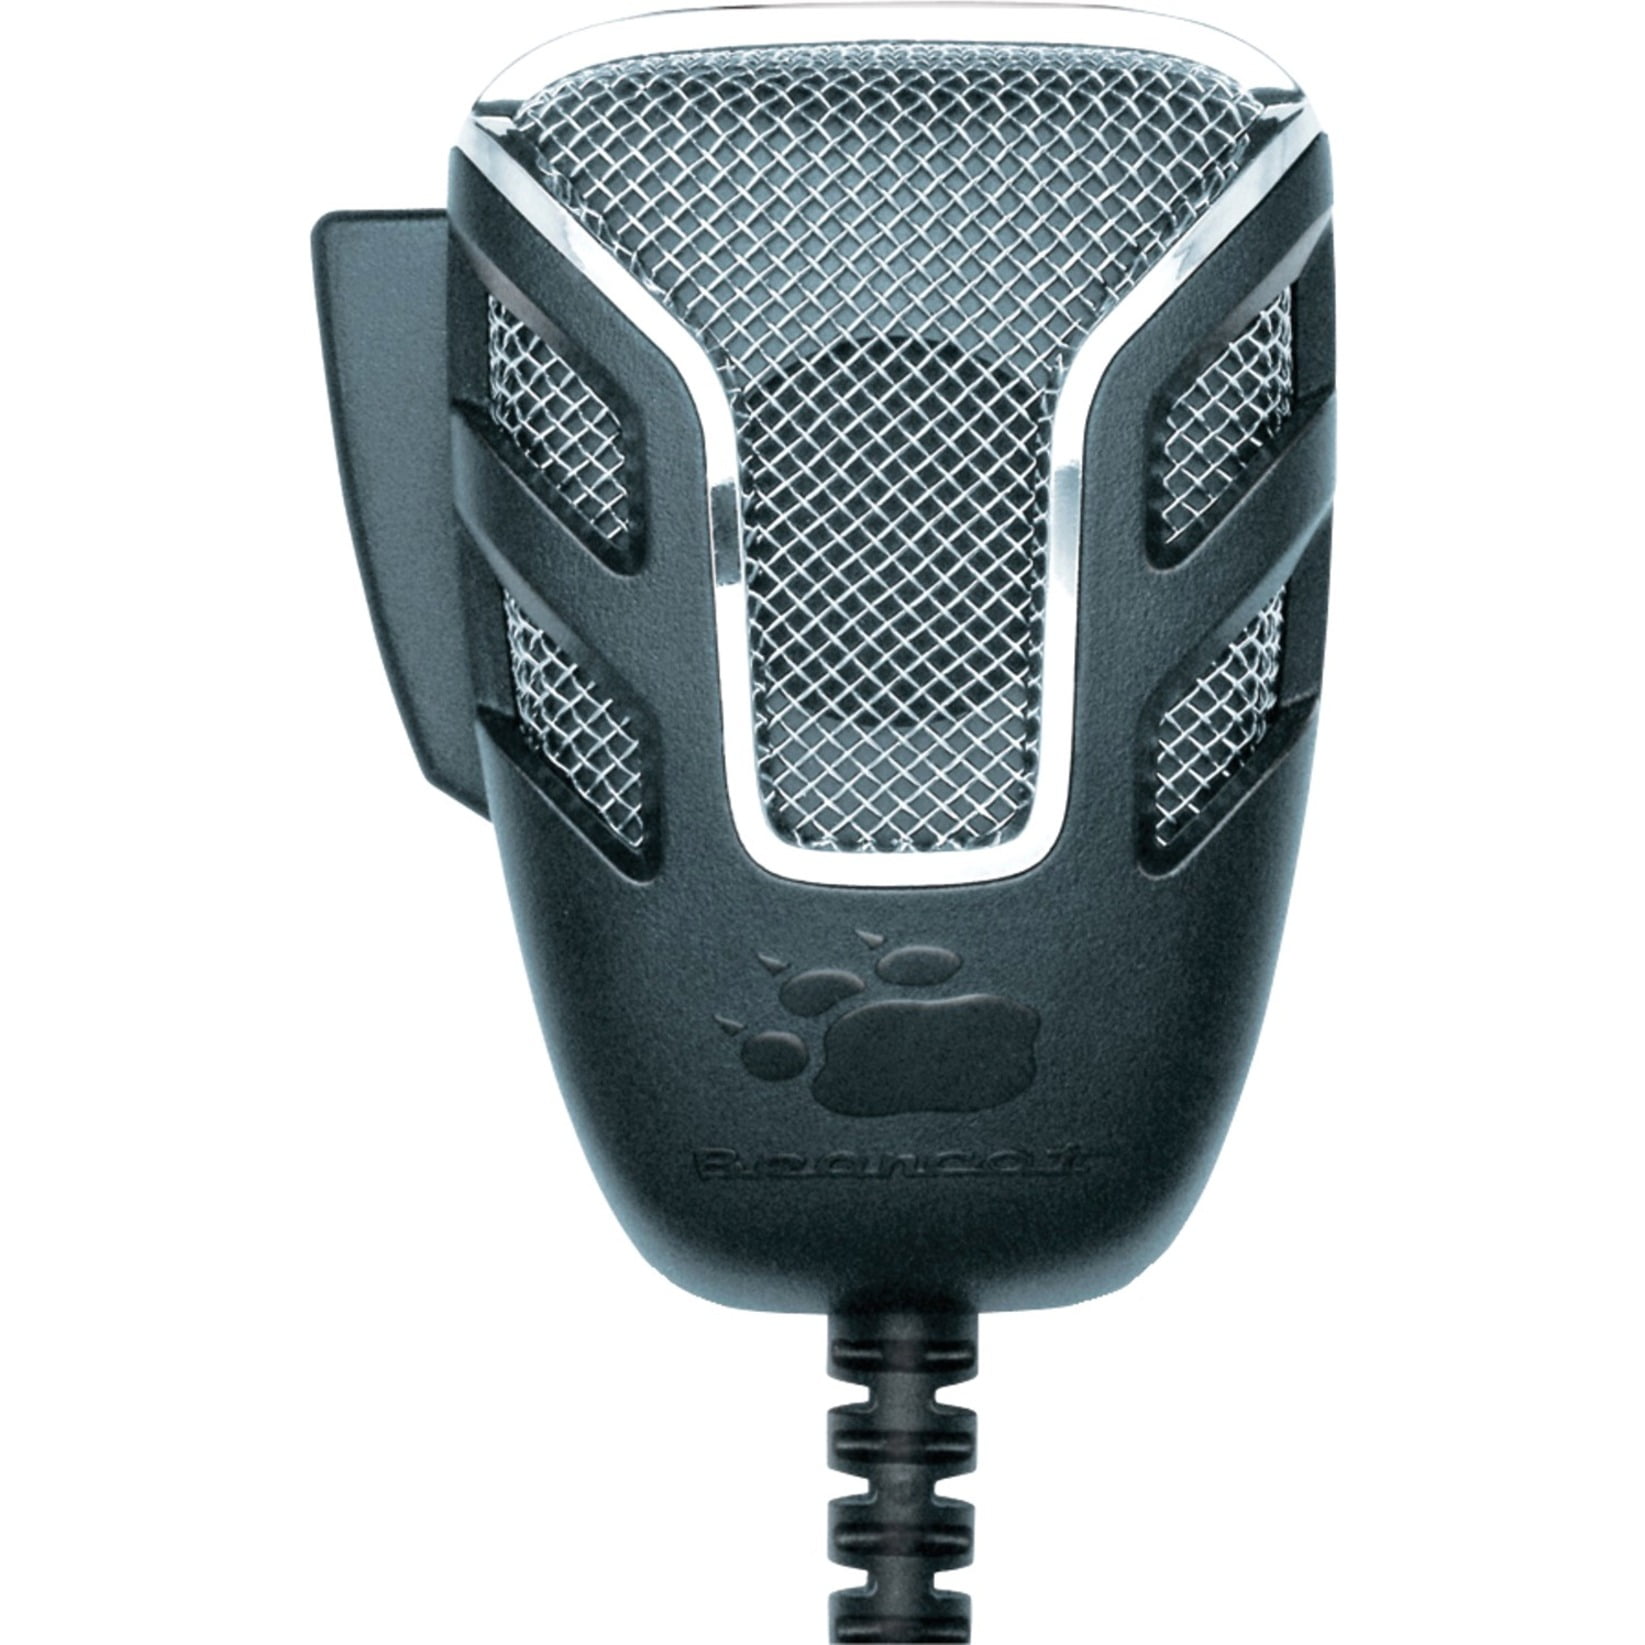 Astatic 636L-Stars and Stripes wired 6 Pin Magnum Noise Canceling Microphone 